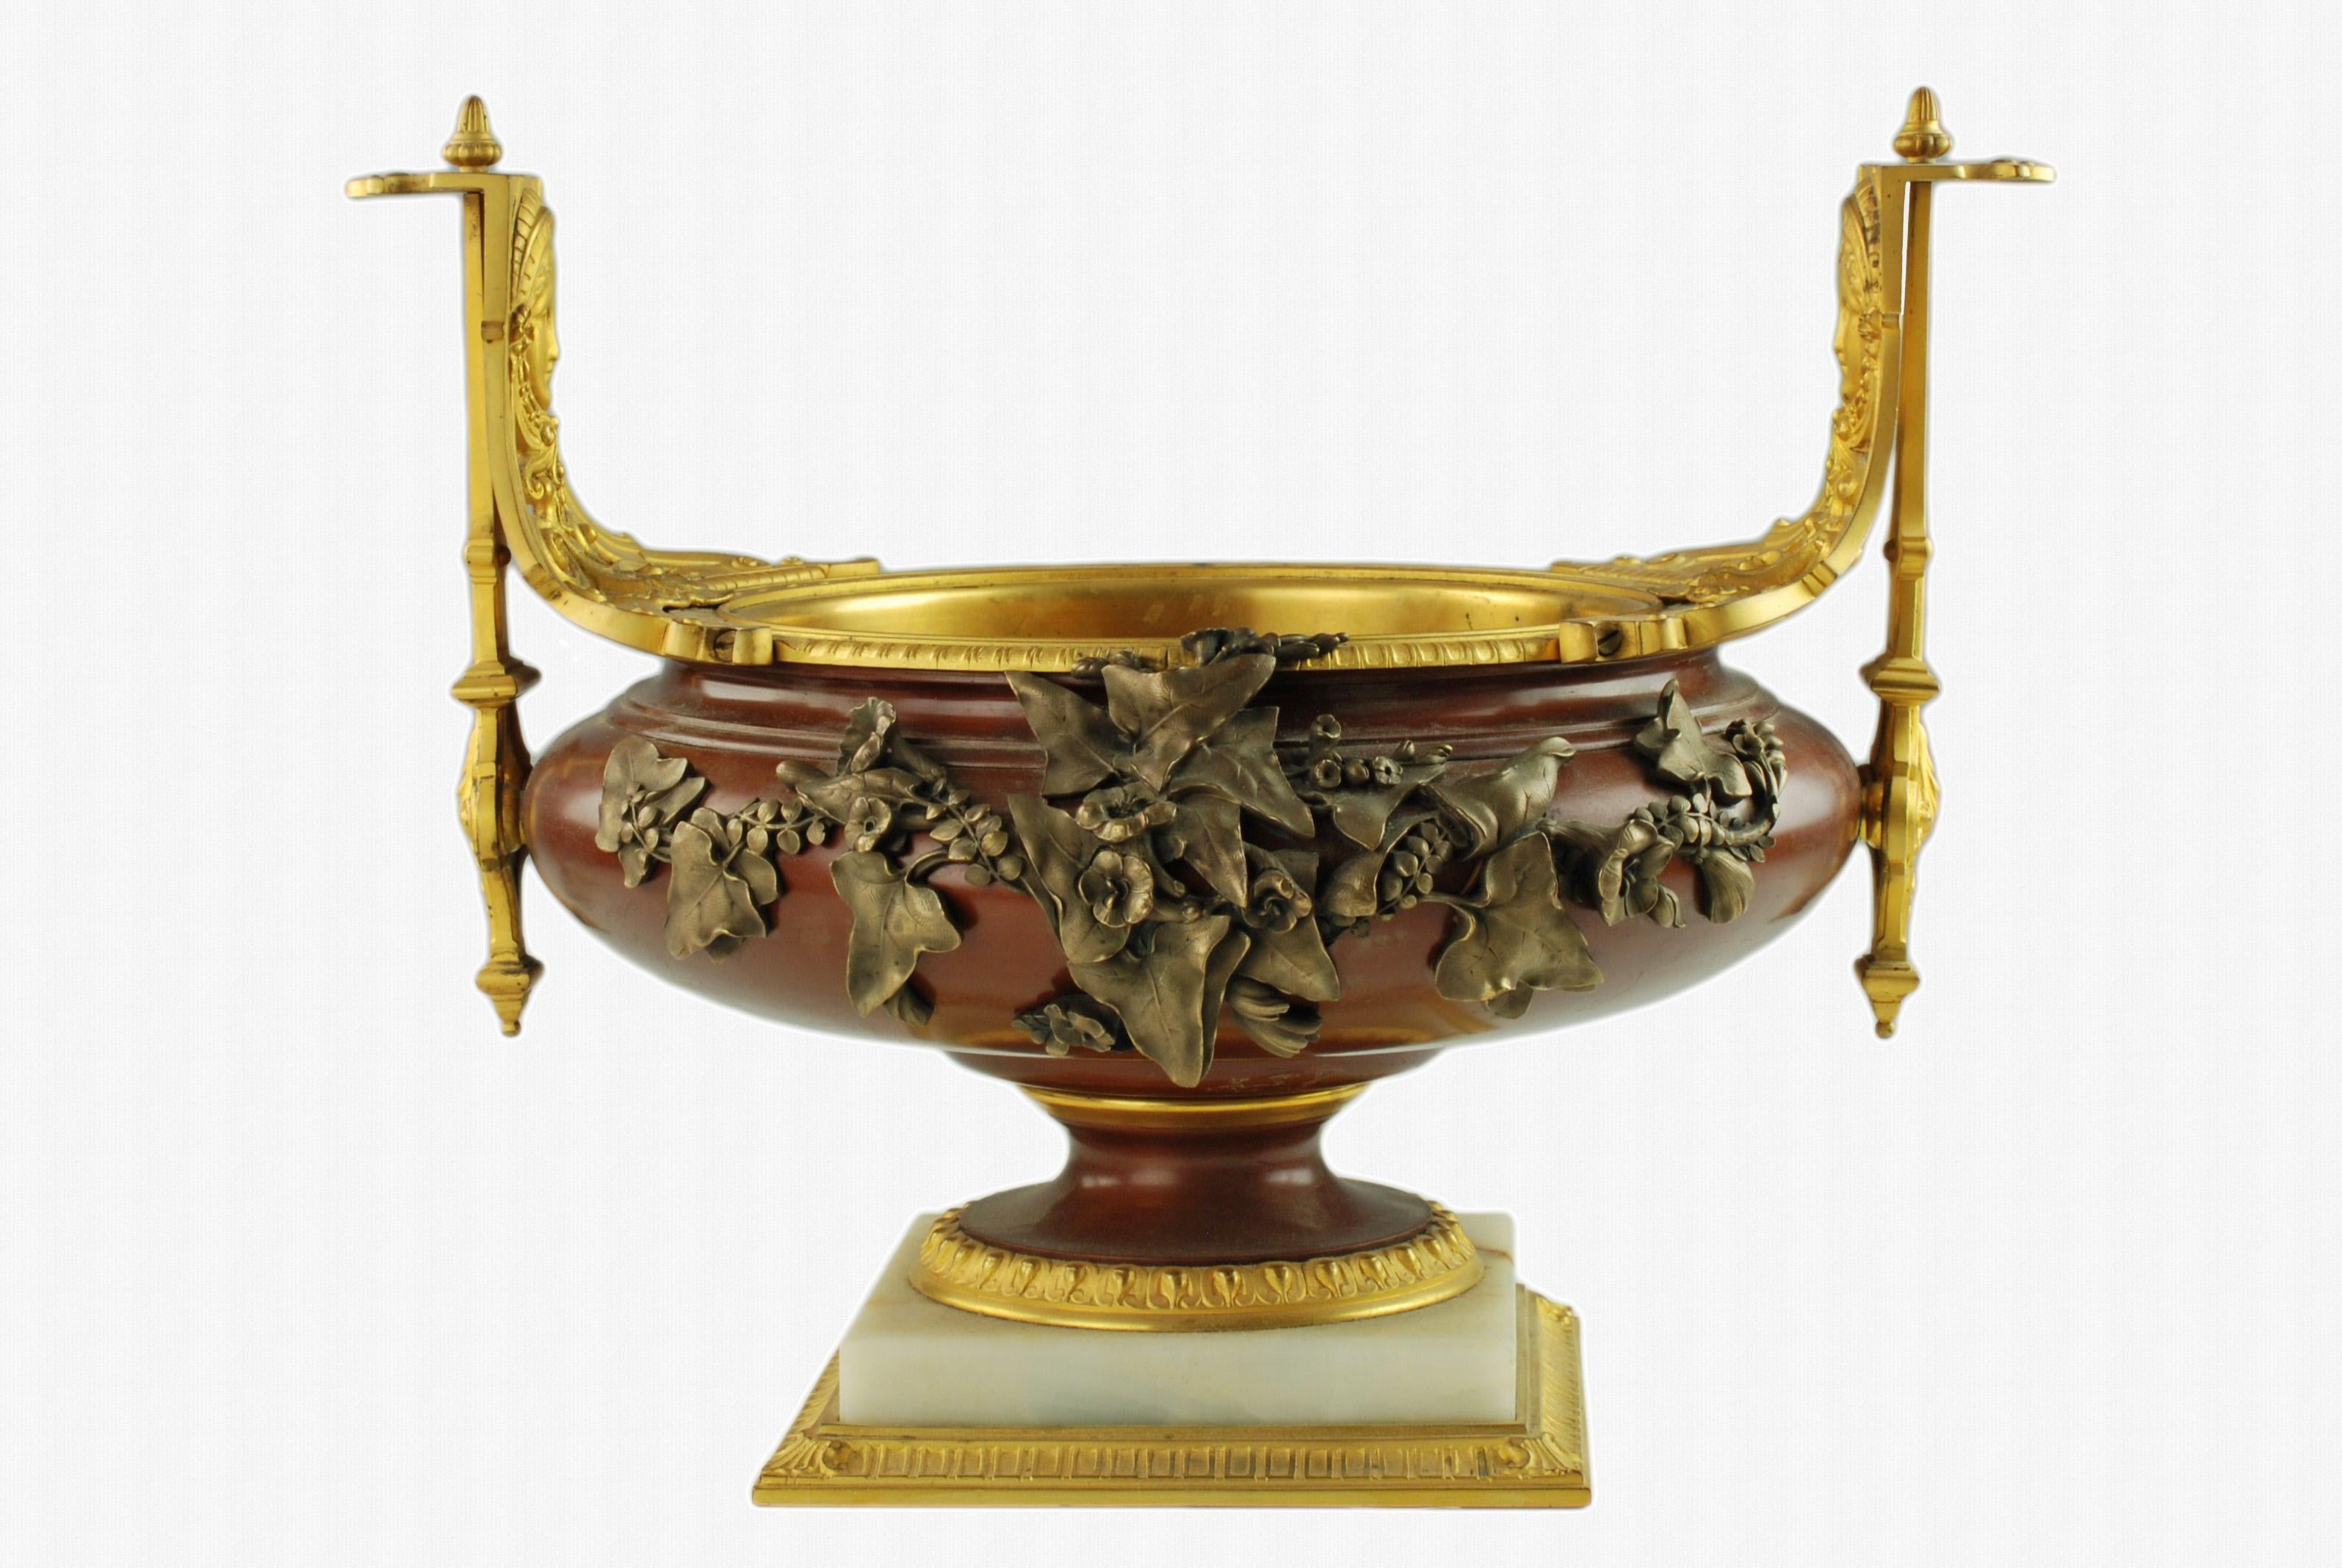 This exceptional late 19th century three-piece French garniture includes two footed urns and a low footed centerpiece bowl. The urns and bowl are composed of patinated bronze with ormolu mounts which include neoclassical mask detail and rest on